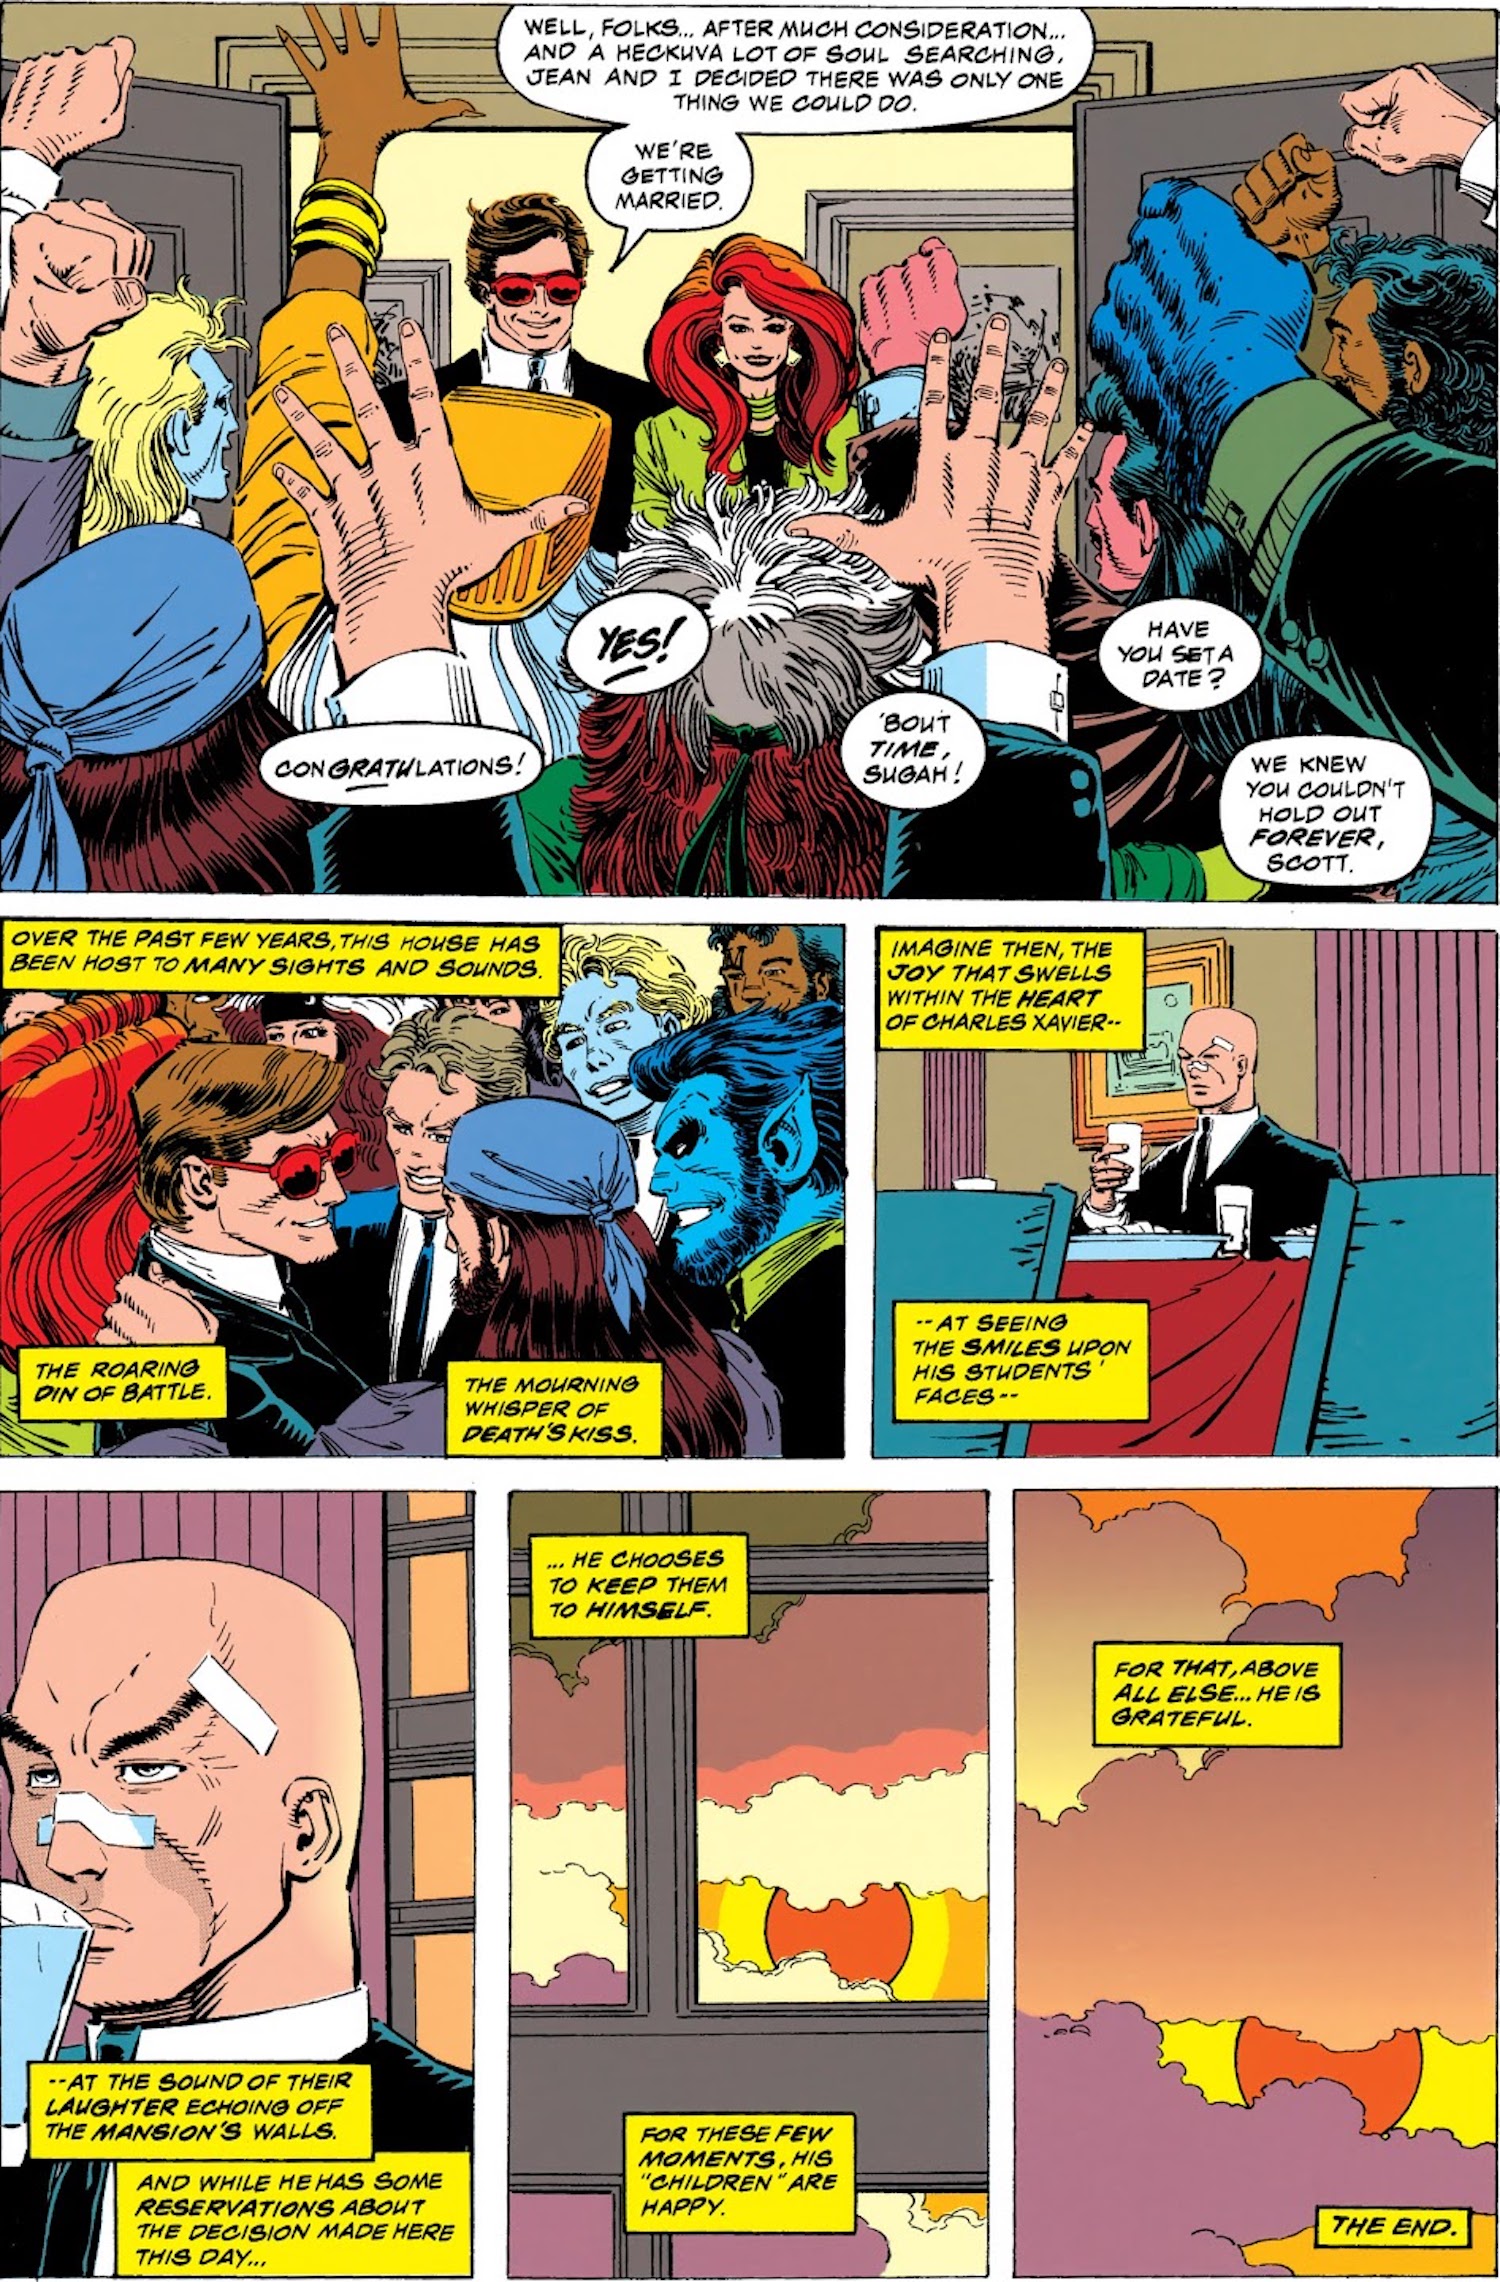 This image is from Uncanny X-Men #308 (1963) and shows Jean Grey and Scott Summers announcing their engagement, as well as Professor Xavier's joy over the event. 